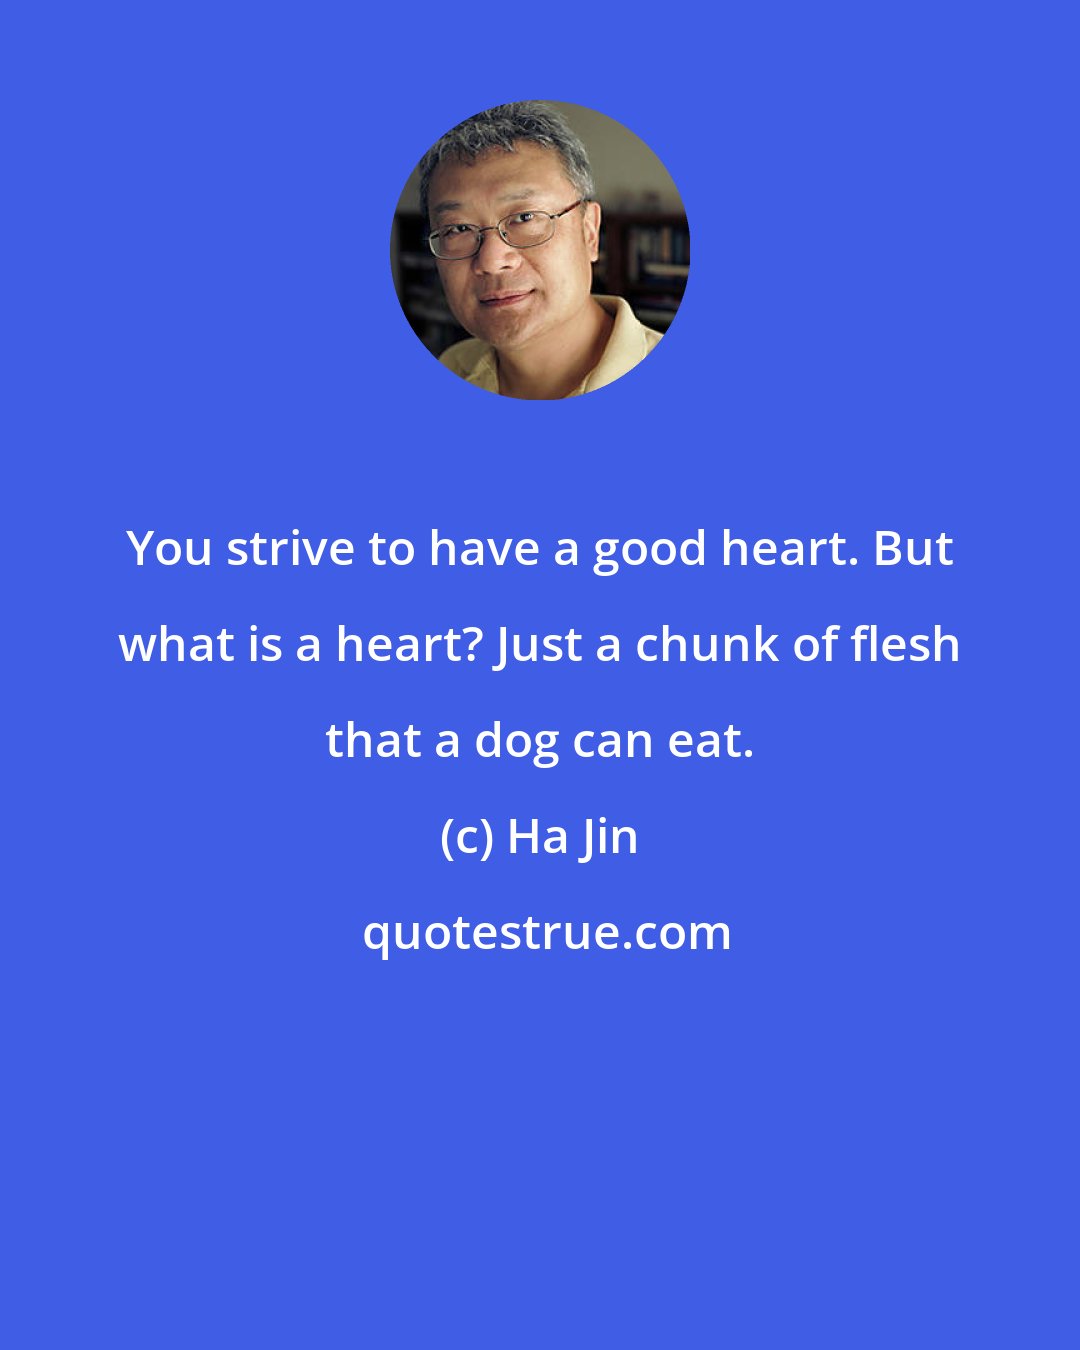 Ha Jin: You strive to have a good heart. But what is a heart? Just a chunk of flesh that a dog can eat.